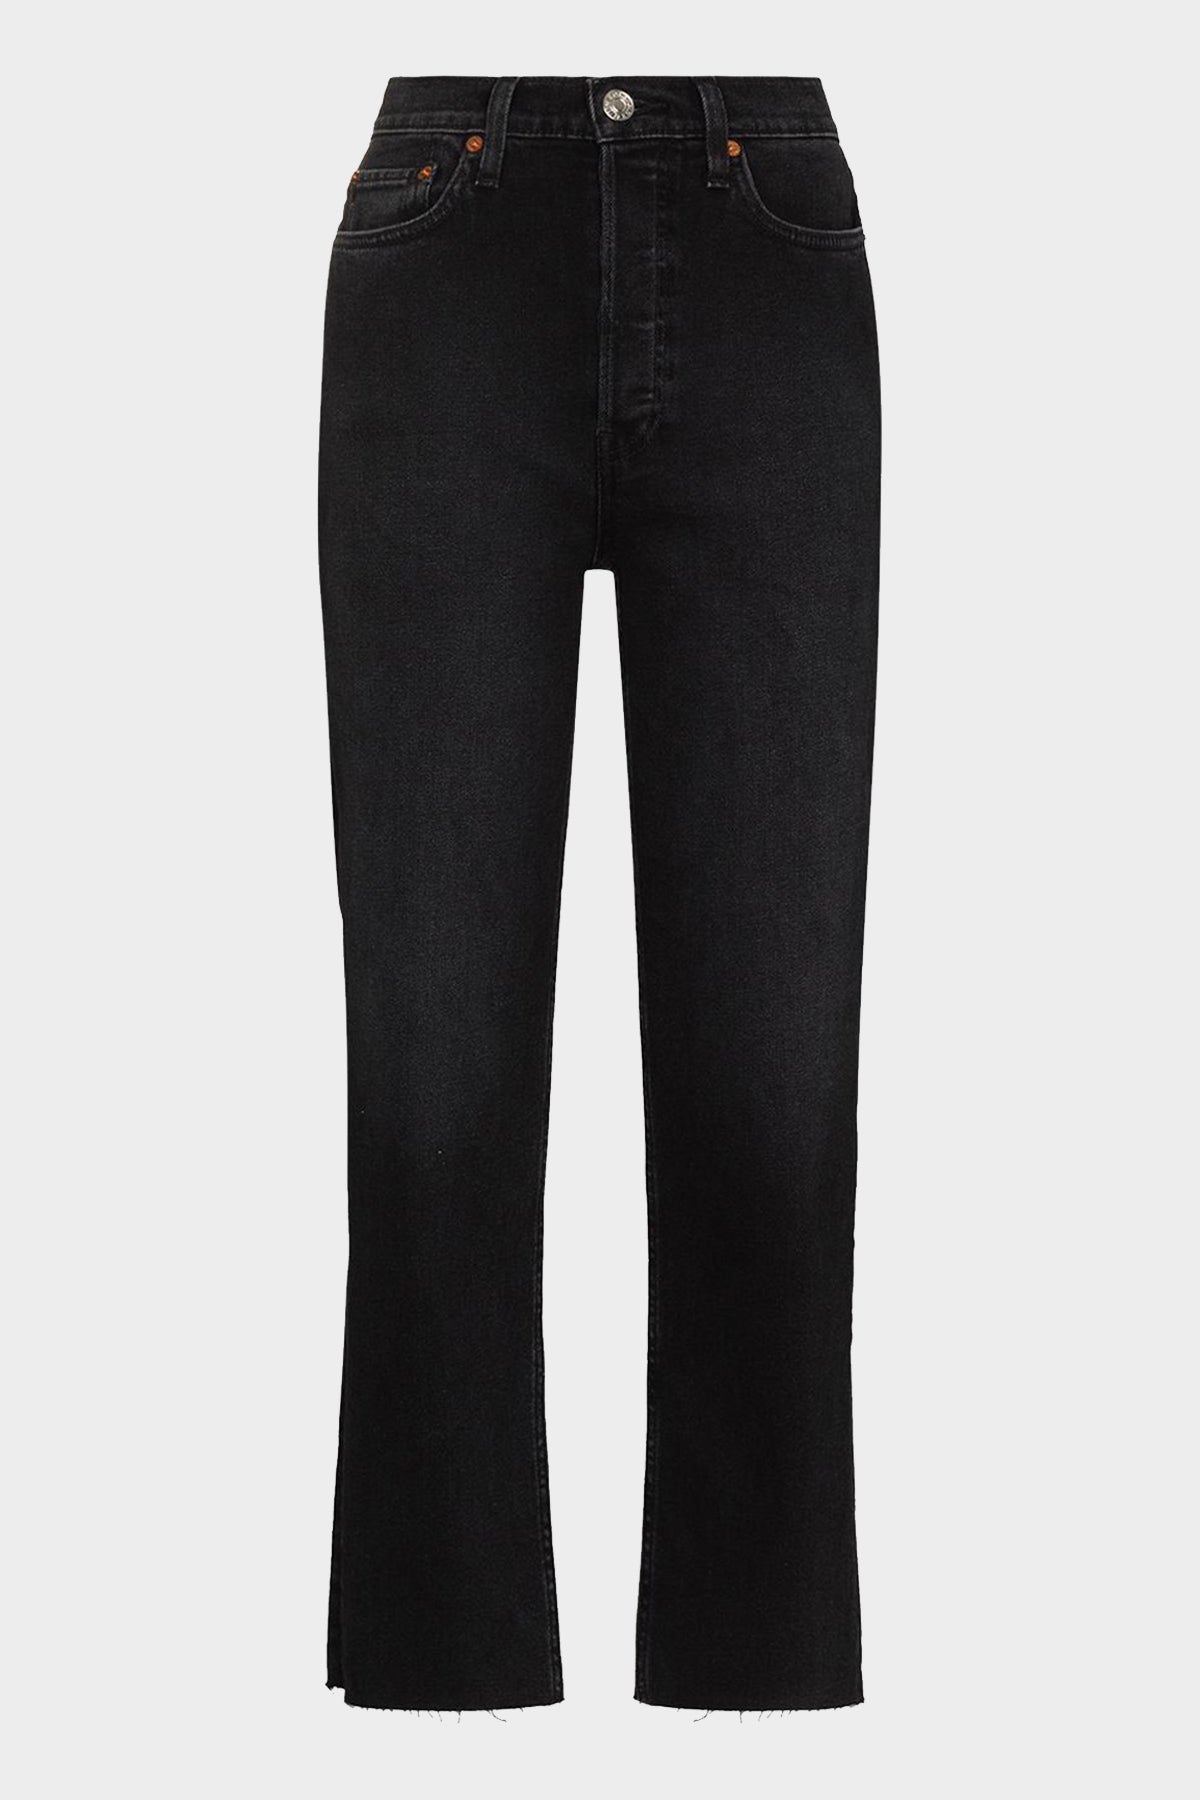 70s Stove Pipe Jeans in Washed Noir - shop-olivia.com